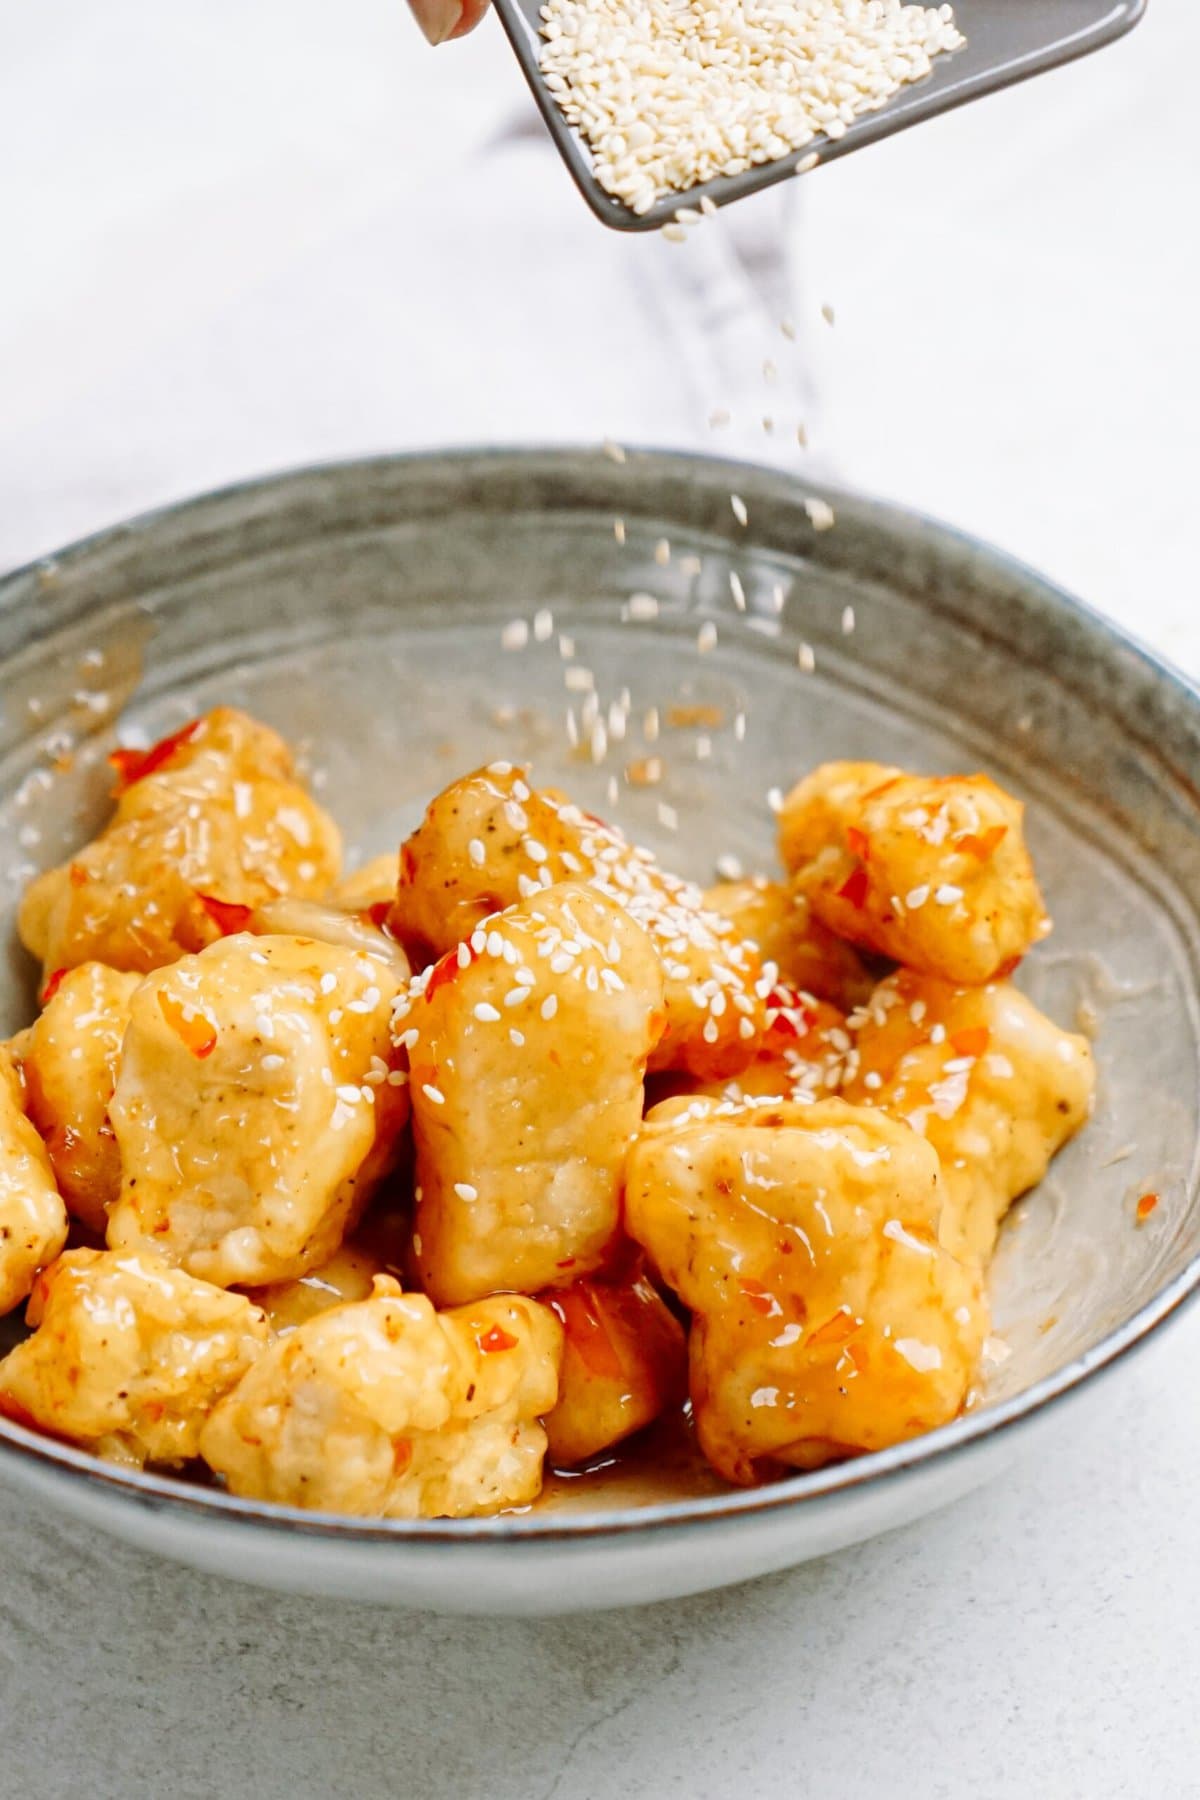 A person is sprinkling sesame seeds on chicken in a bowl.